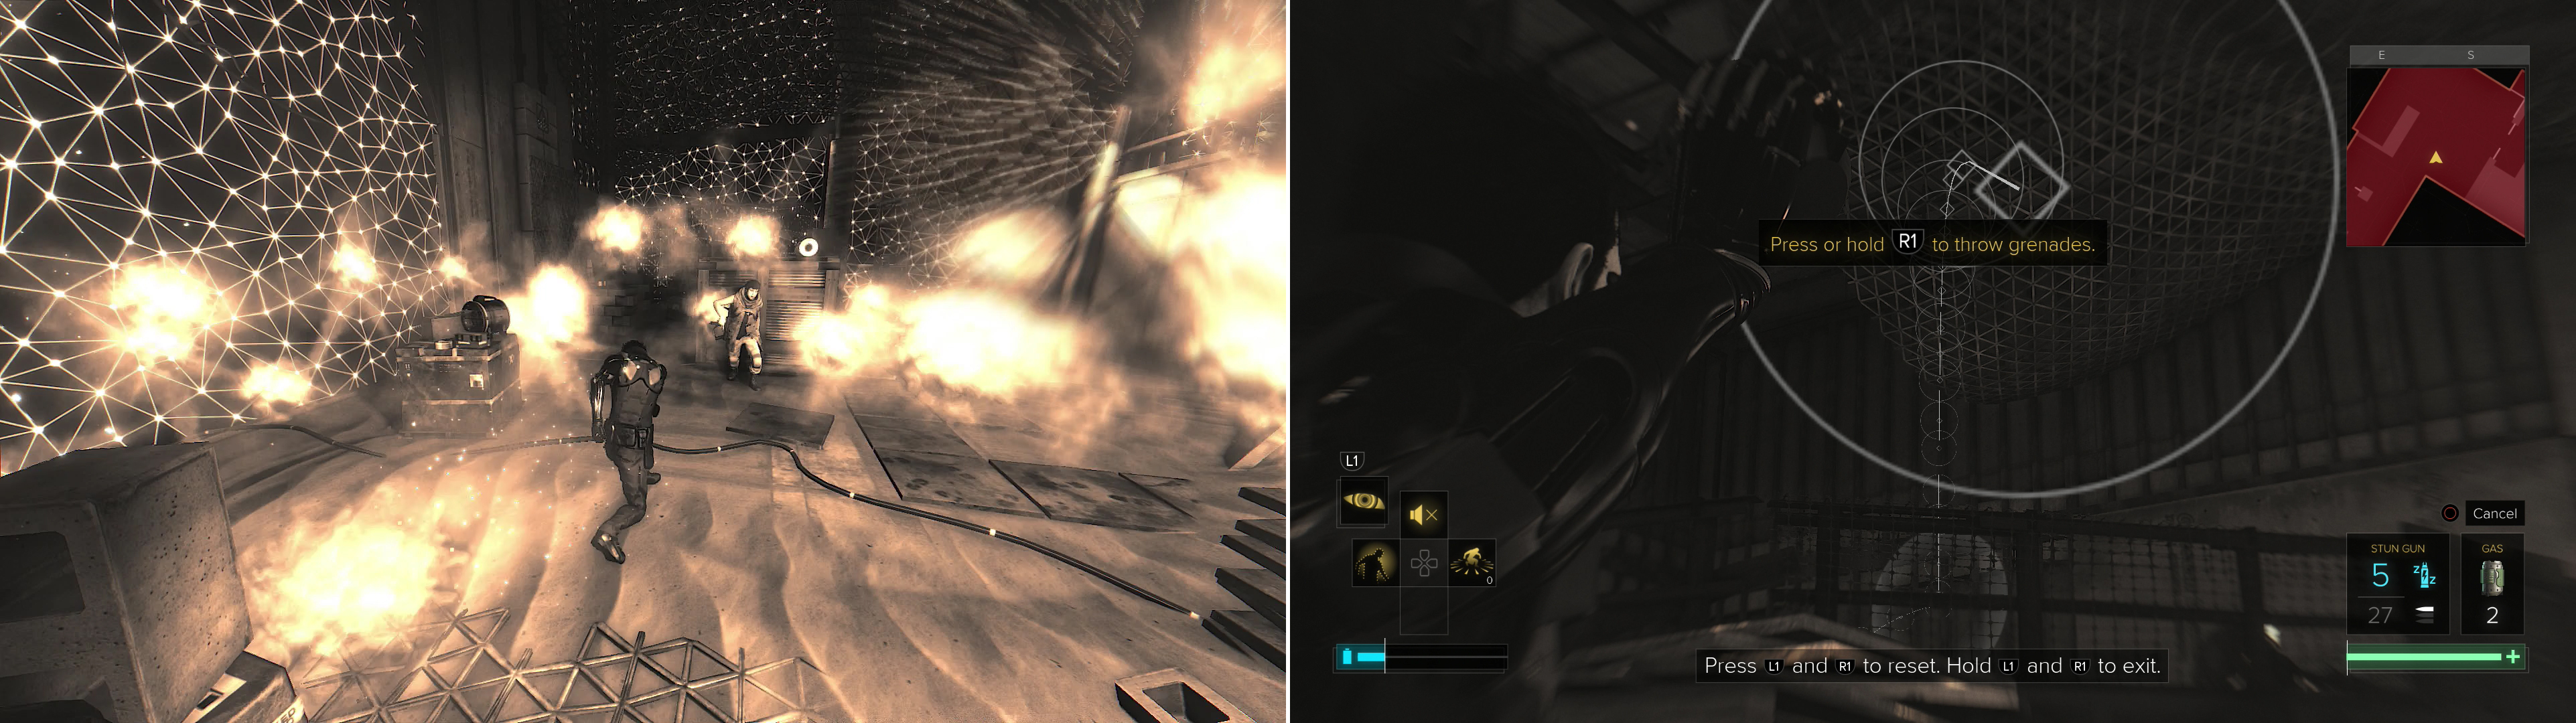 A combat tutorial will let you play with the "Typhoon" augmentation (left) and grenades (right).